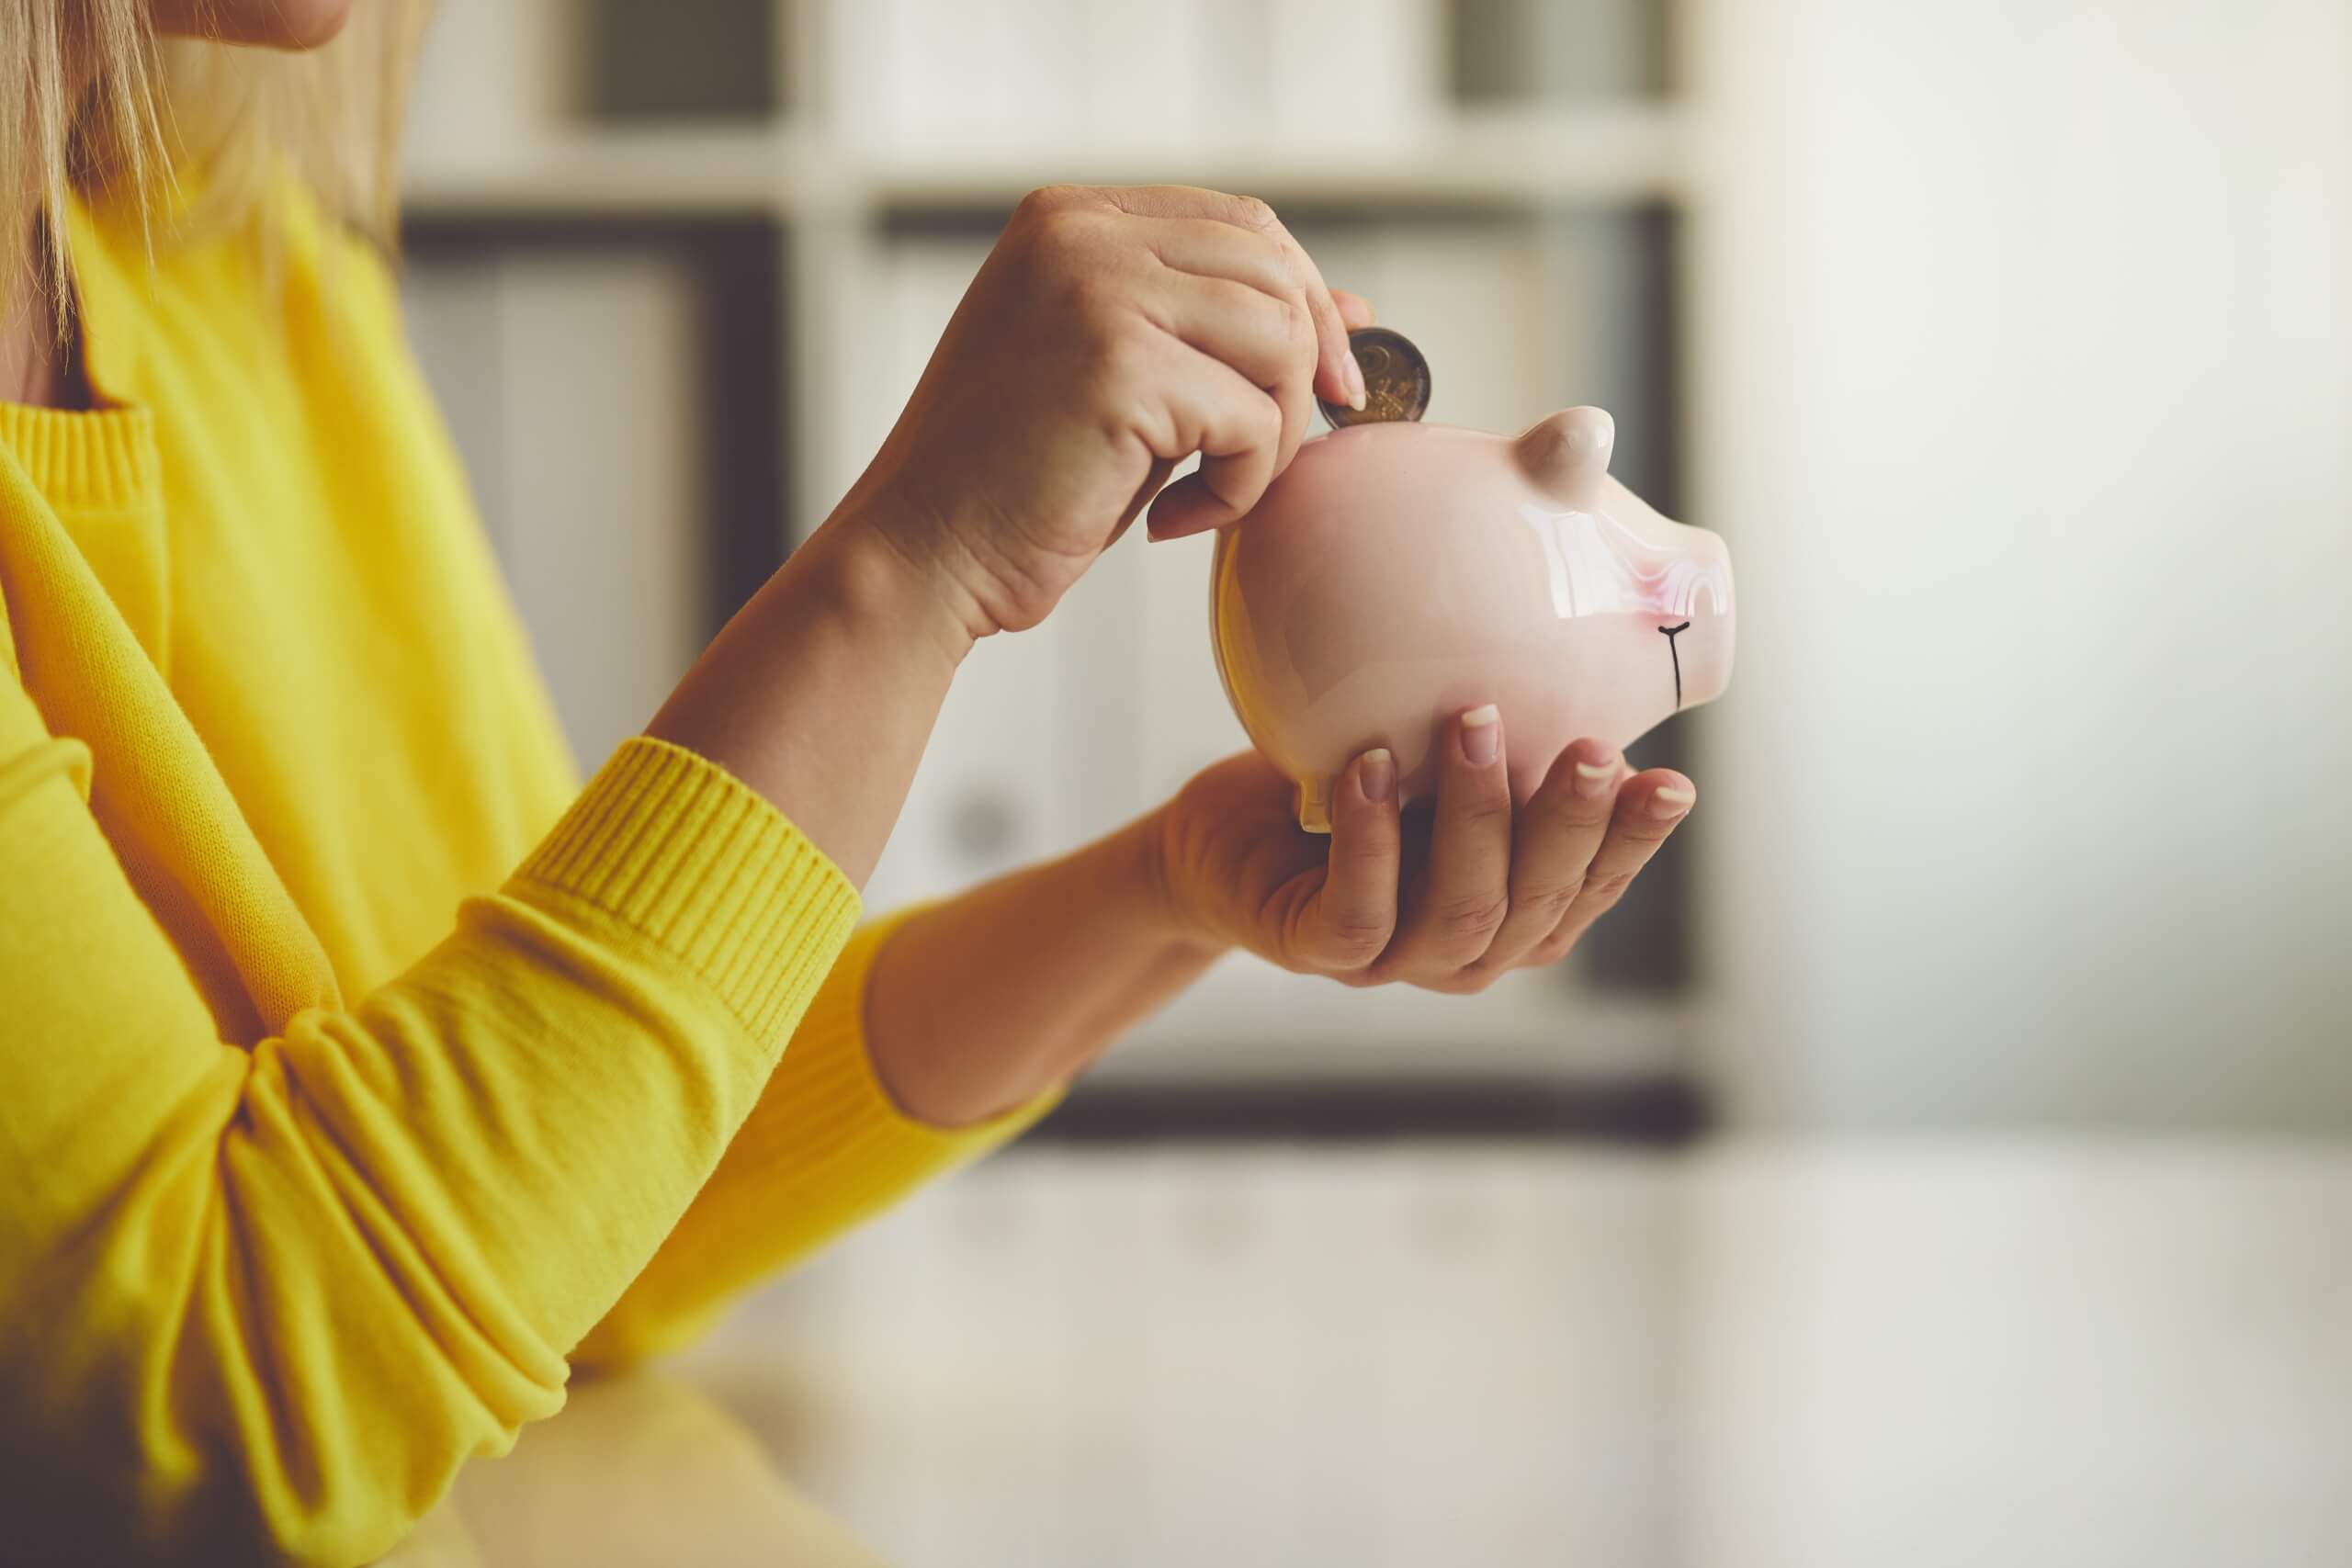 Woman inserts a coin into a piggy bank representation of gender gap